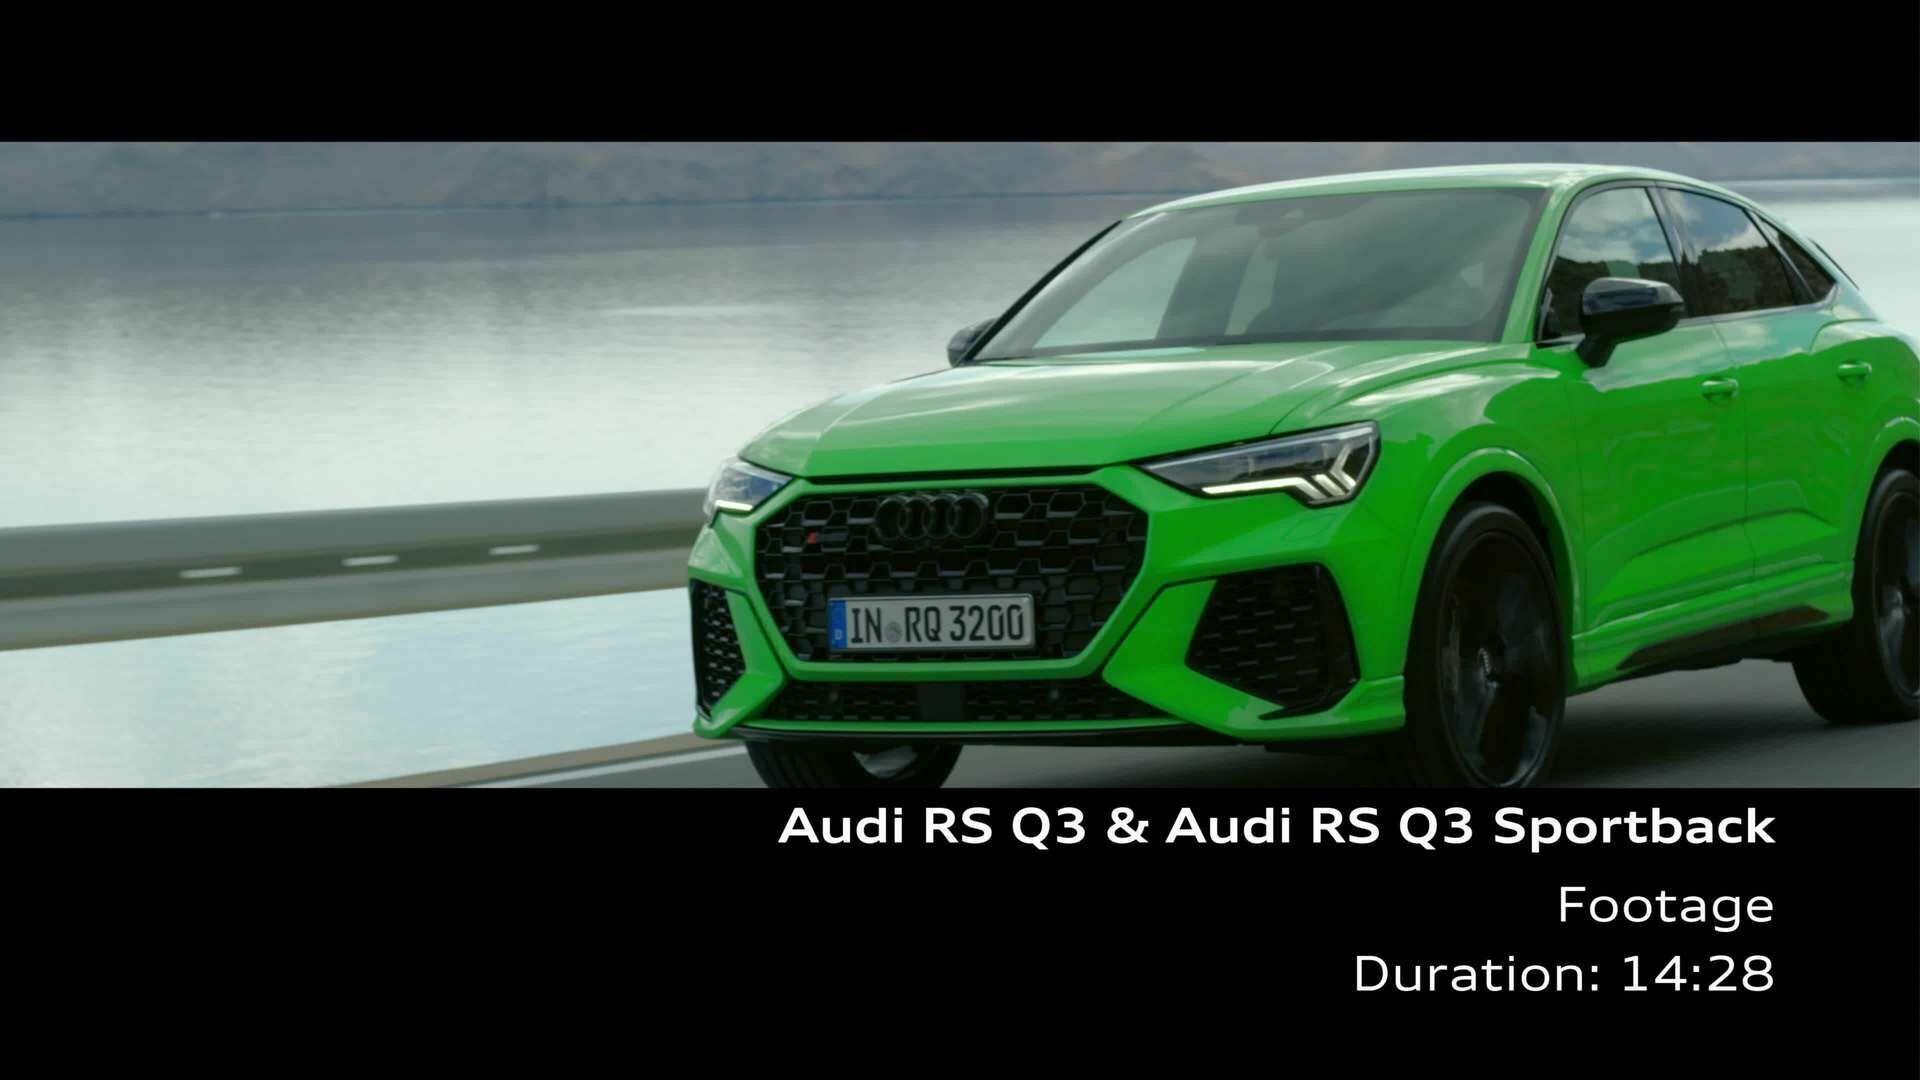 Audi RS Q3 and RS Q3 Sportback (Footage)